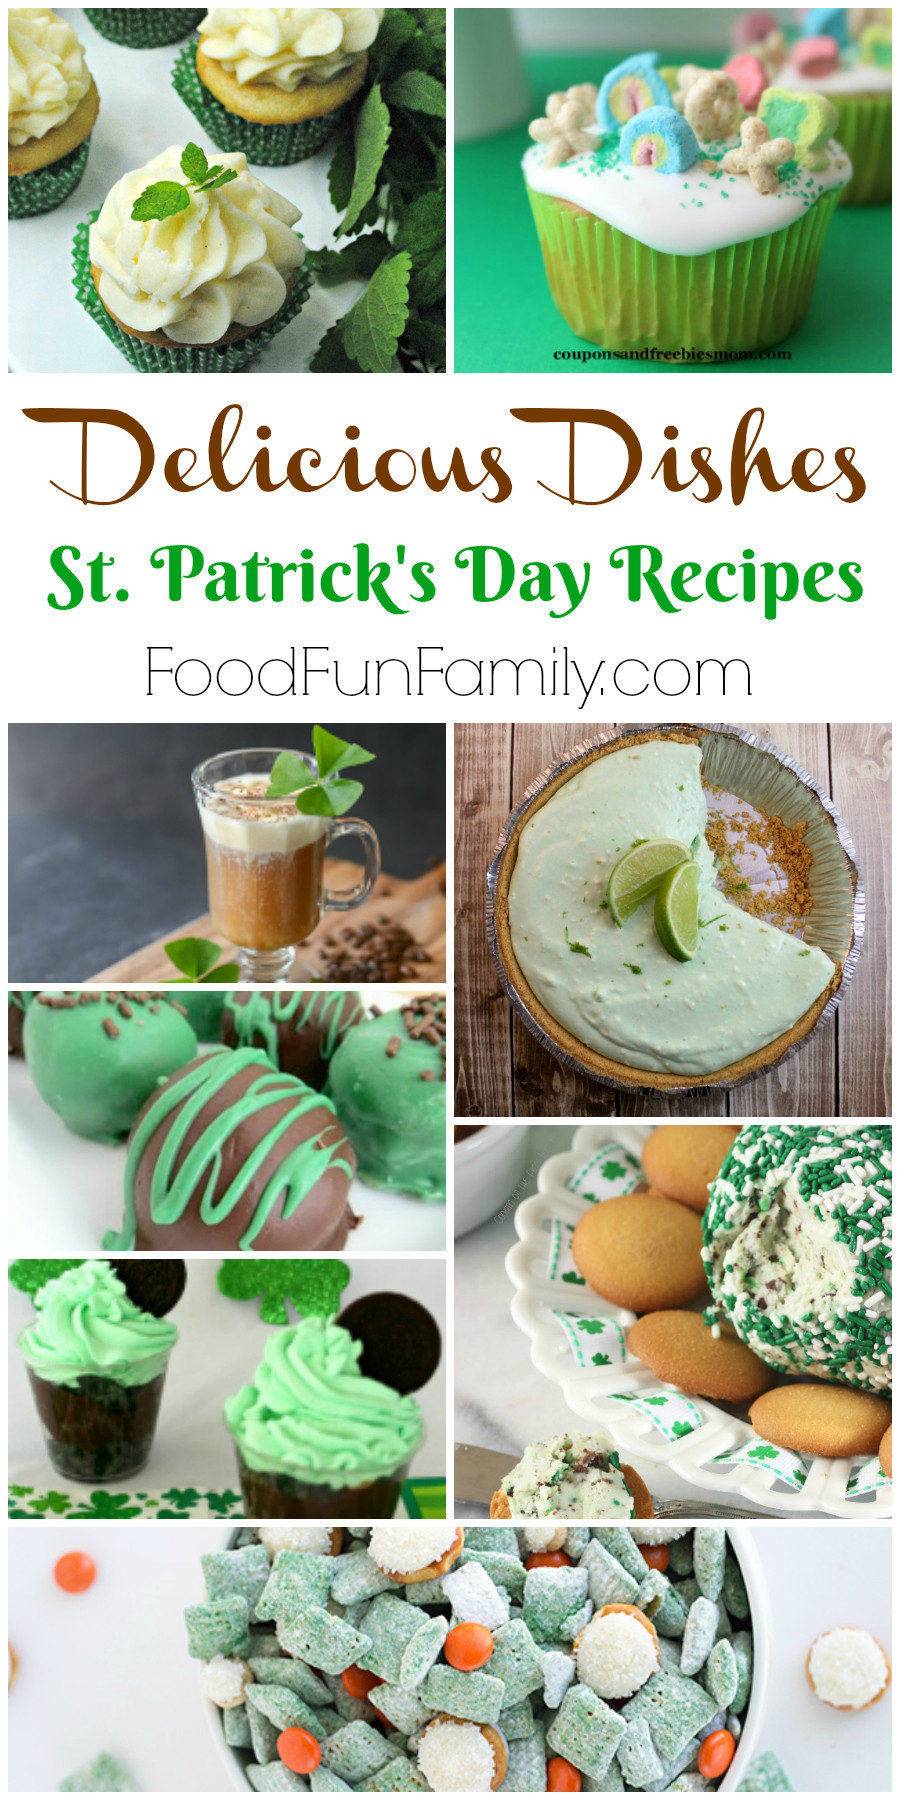 St Patrick's Day Food
 Festive St Patrick’s Day Recipes – Delicious Dishes